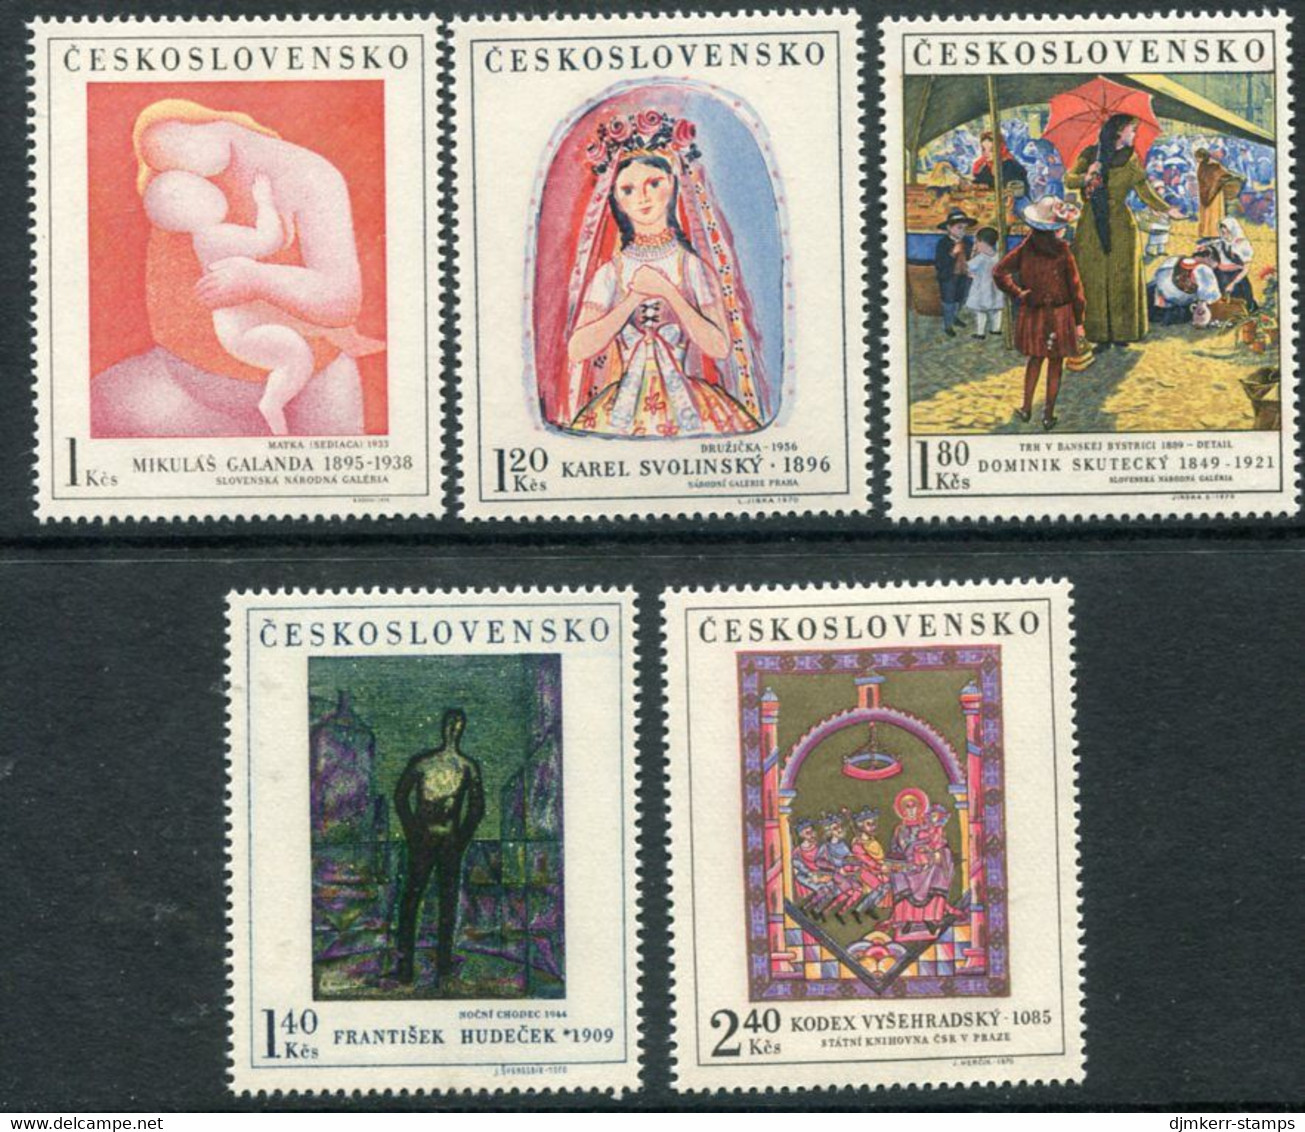 CZECHOSLOVAKIA 1970 National Gallery Paintings V MNH / ** Michel 1965-69 - Unused Stamps